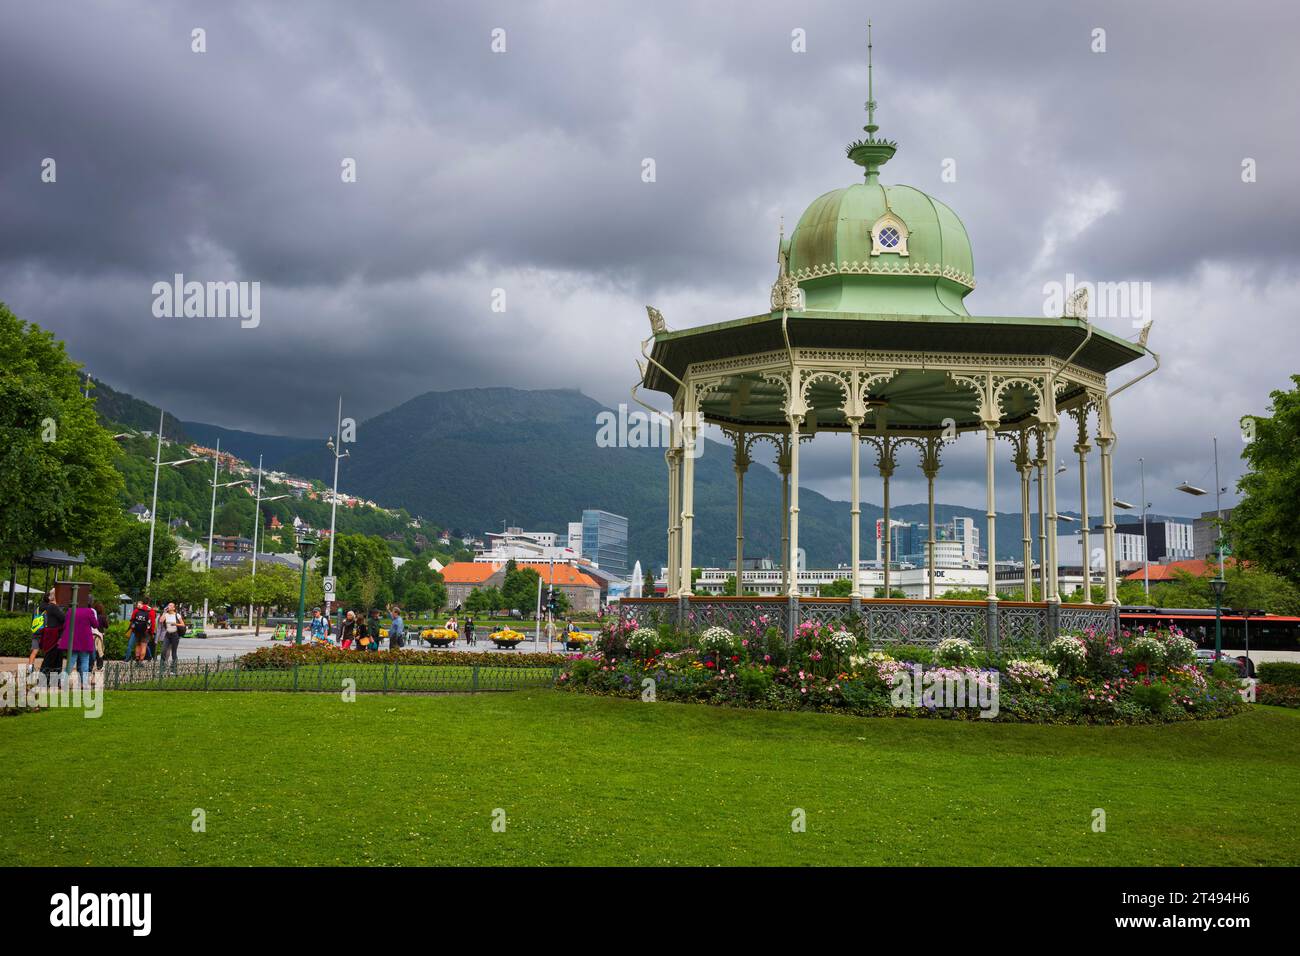 Bergen, Norway, June 22, 2023: Pedestrains walk the city streets of Julemarked Byparken in the center of Bergen during an afternoon. The area is famou Stock Photo